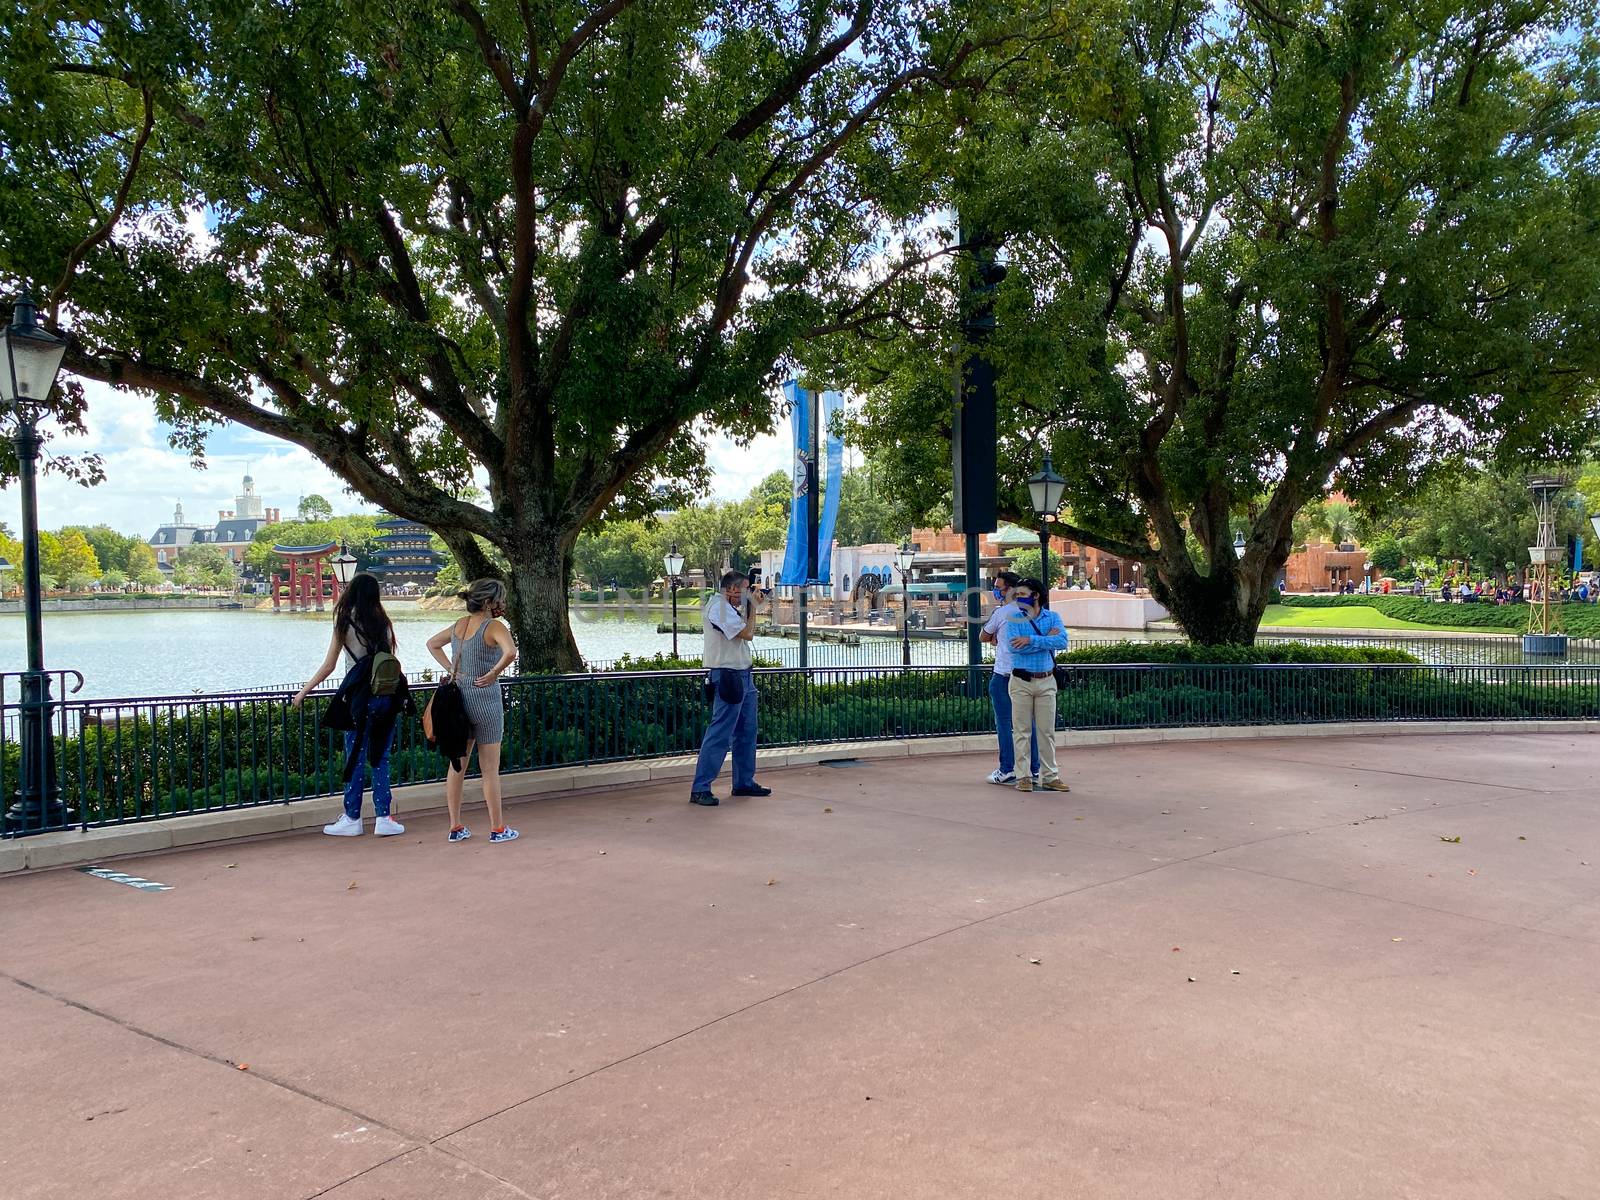 Two men getting their photo taken in  he World Showcase in EPCOT by Jshanebutt